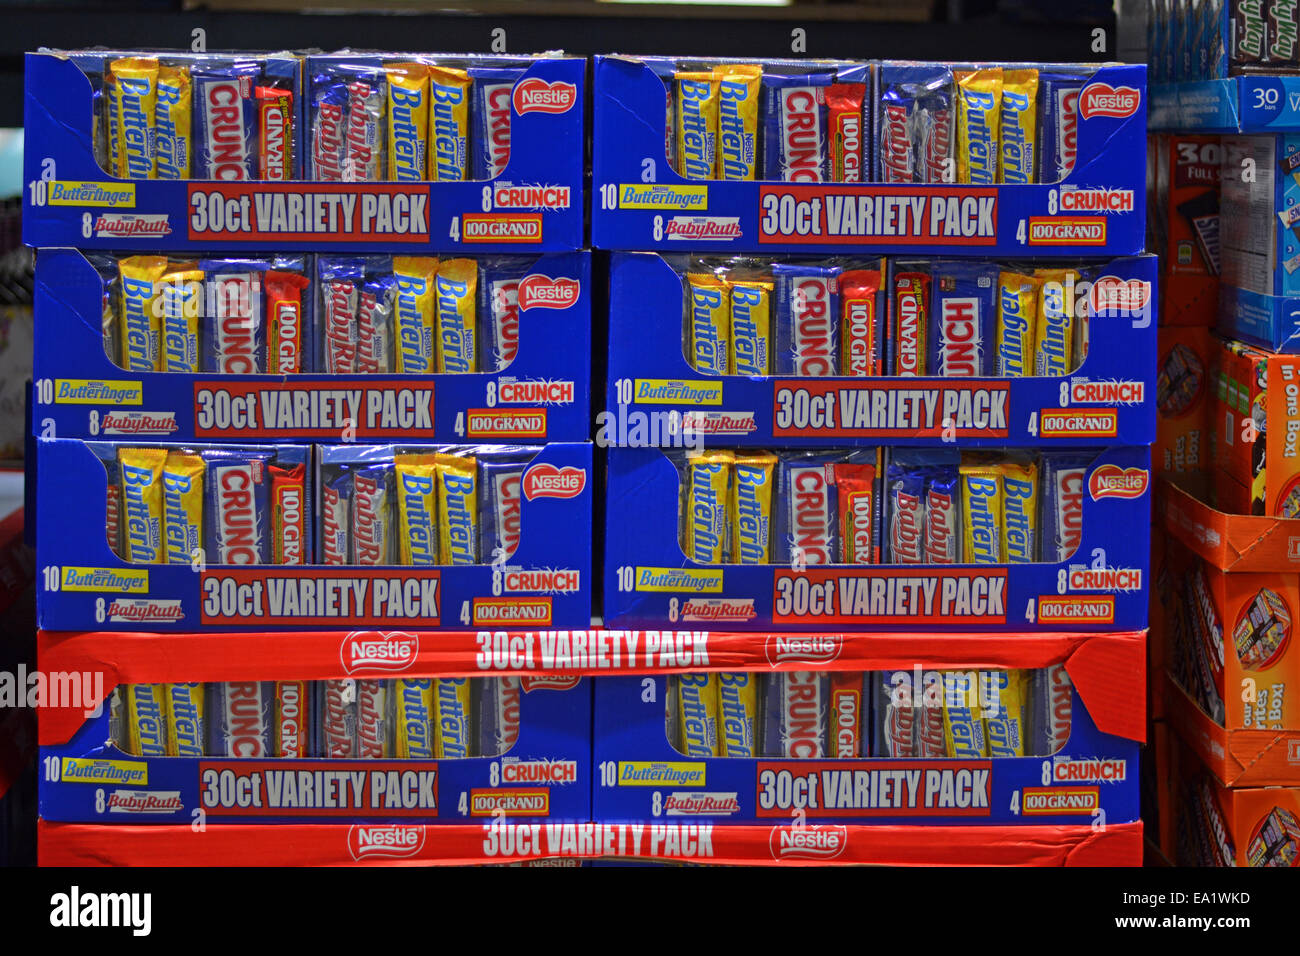 Large packages of 30 candy bars for sale at BJ's Wholesale Club in Whitestone, Queens, New York. Stock Photo